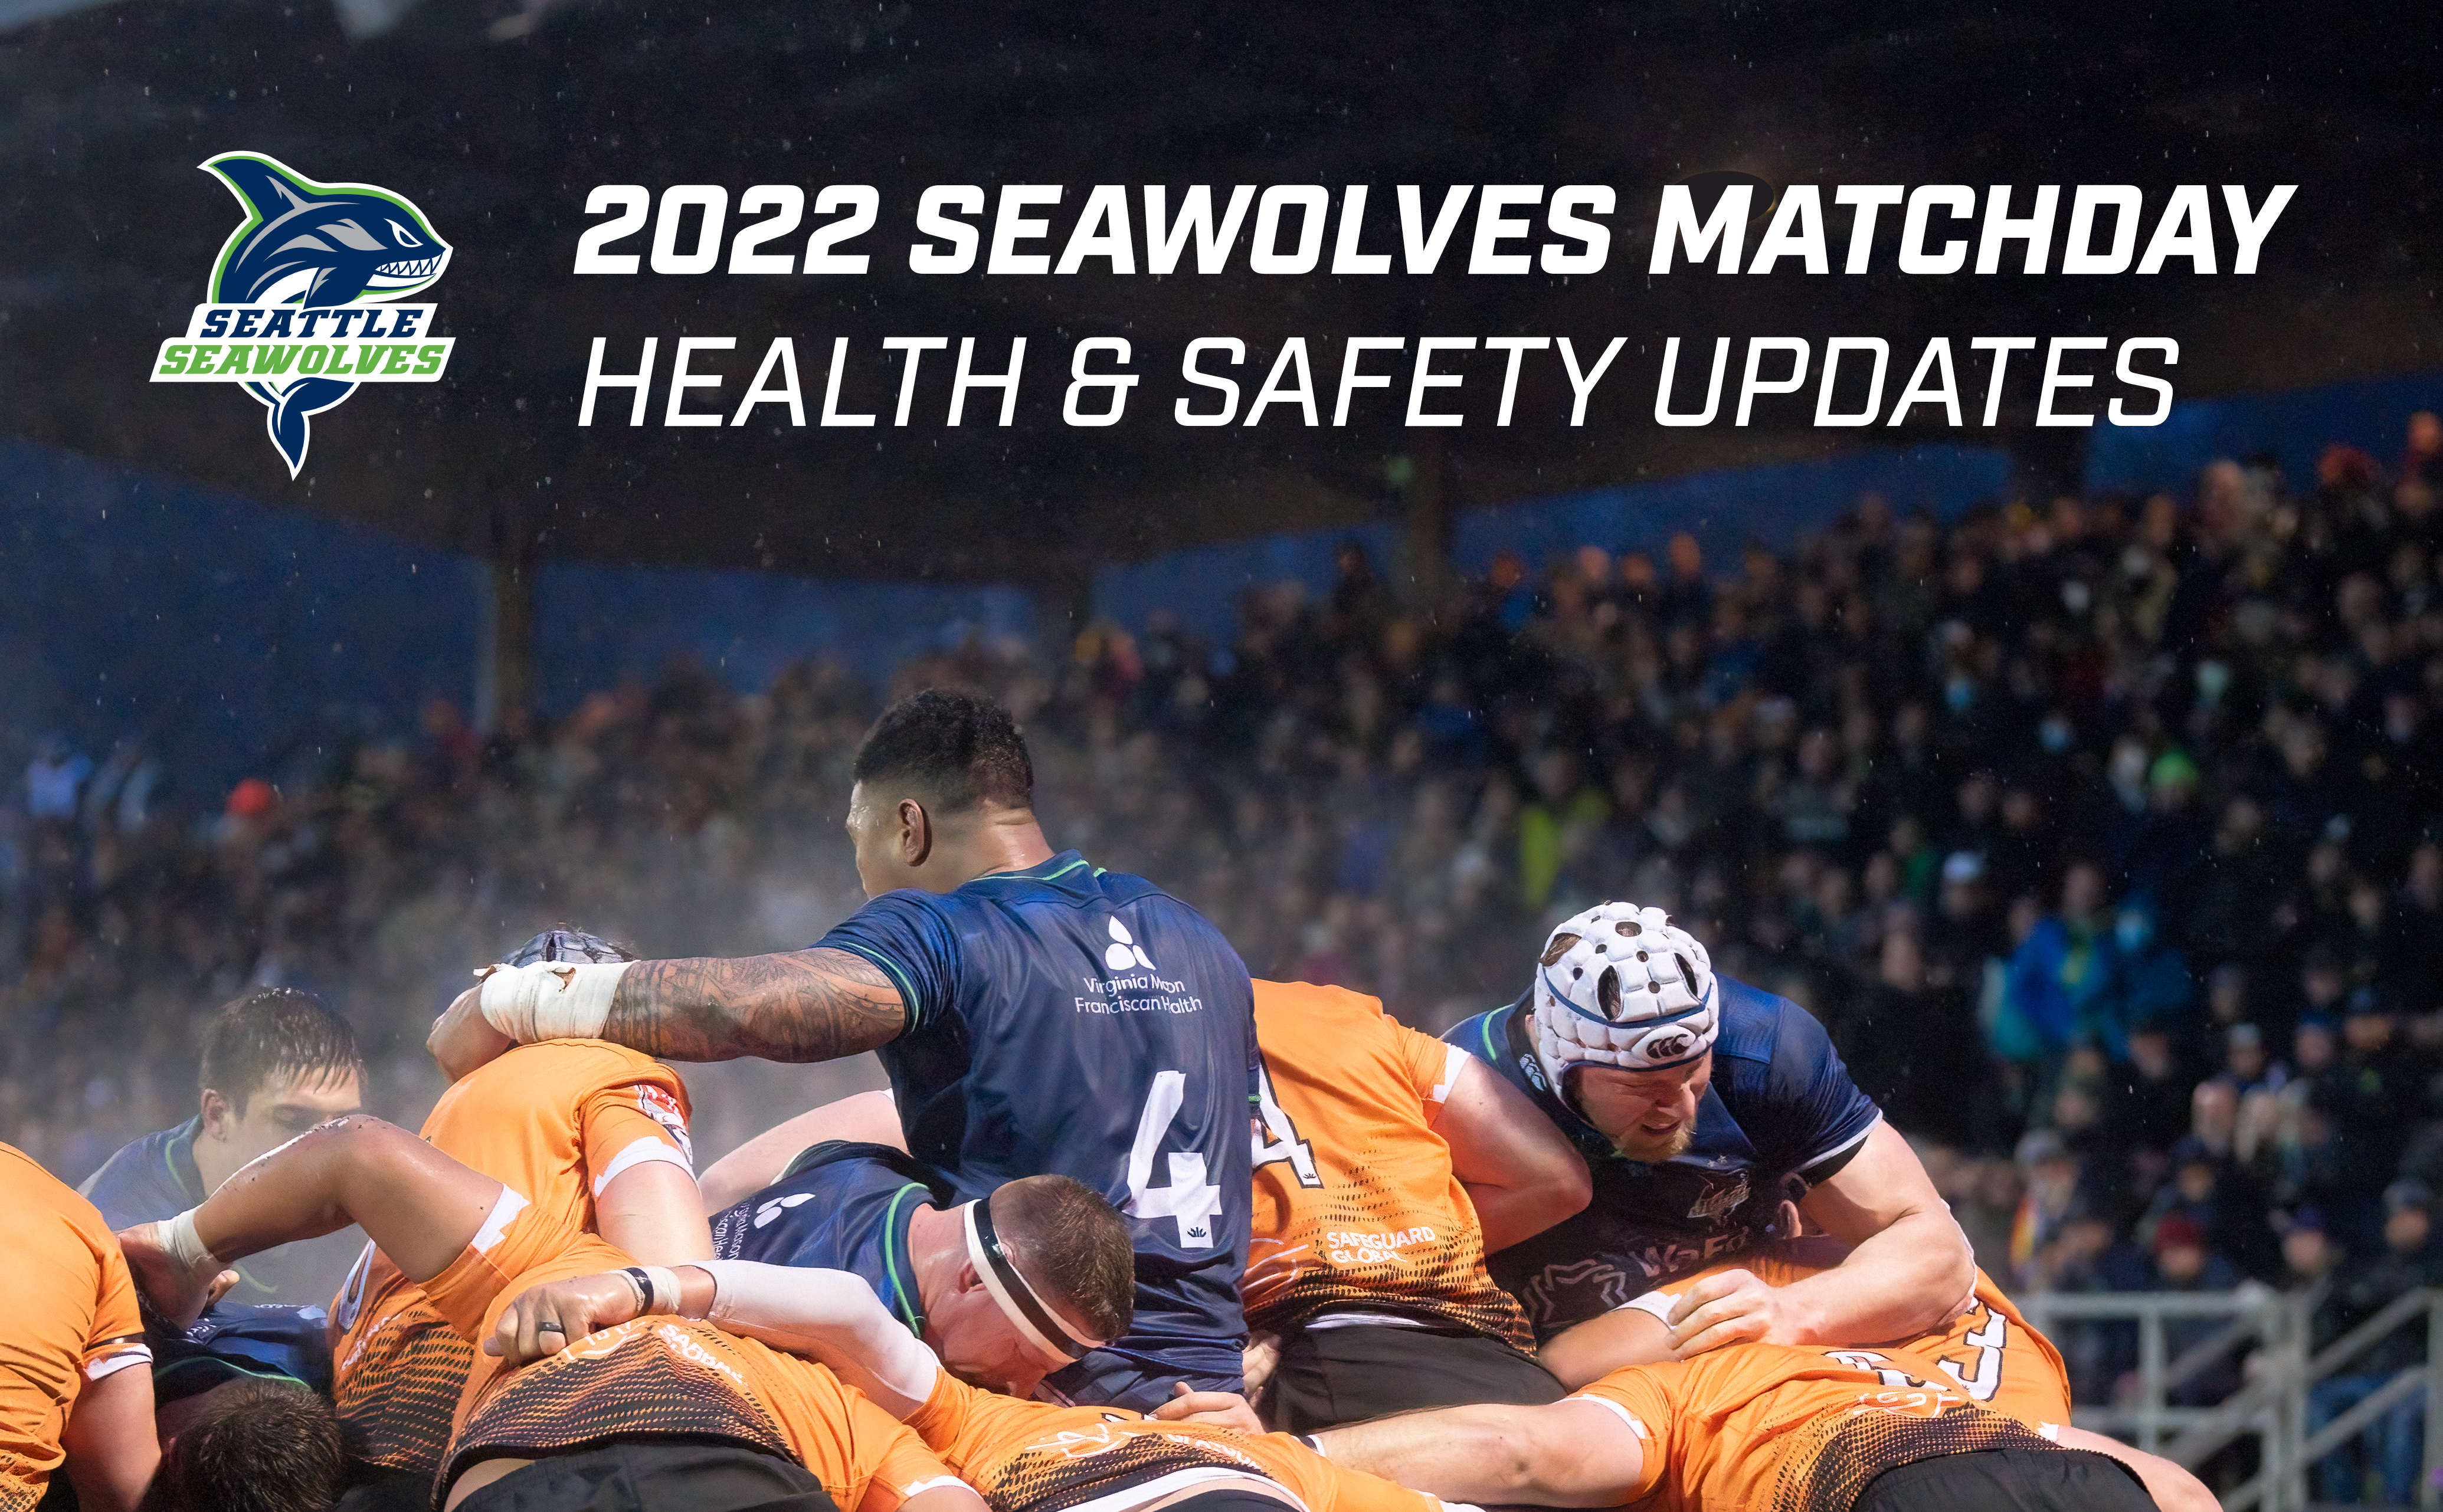 Seawolves Matchday Health & Safety Updates